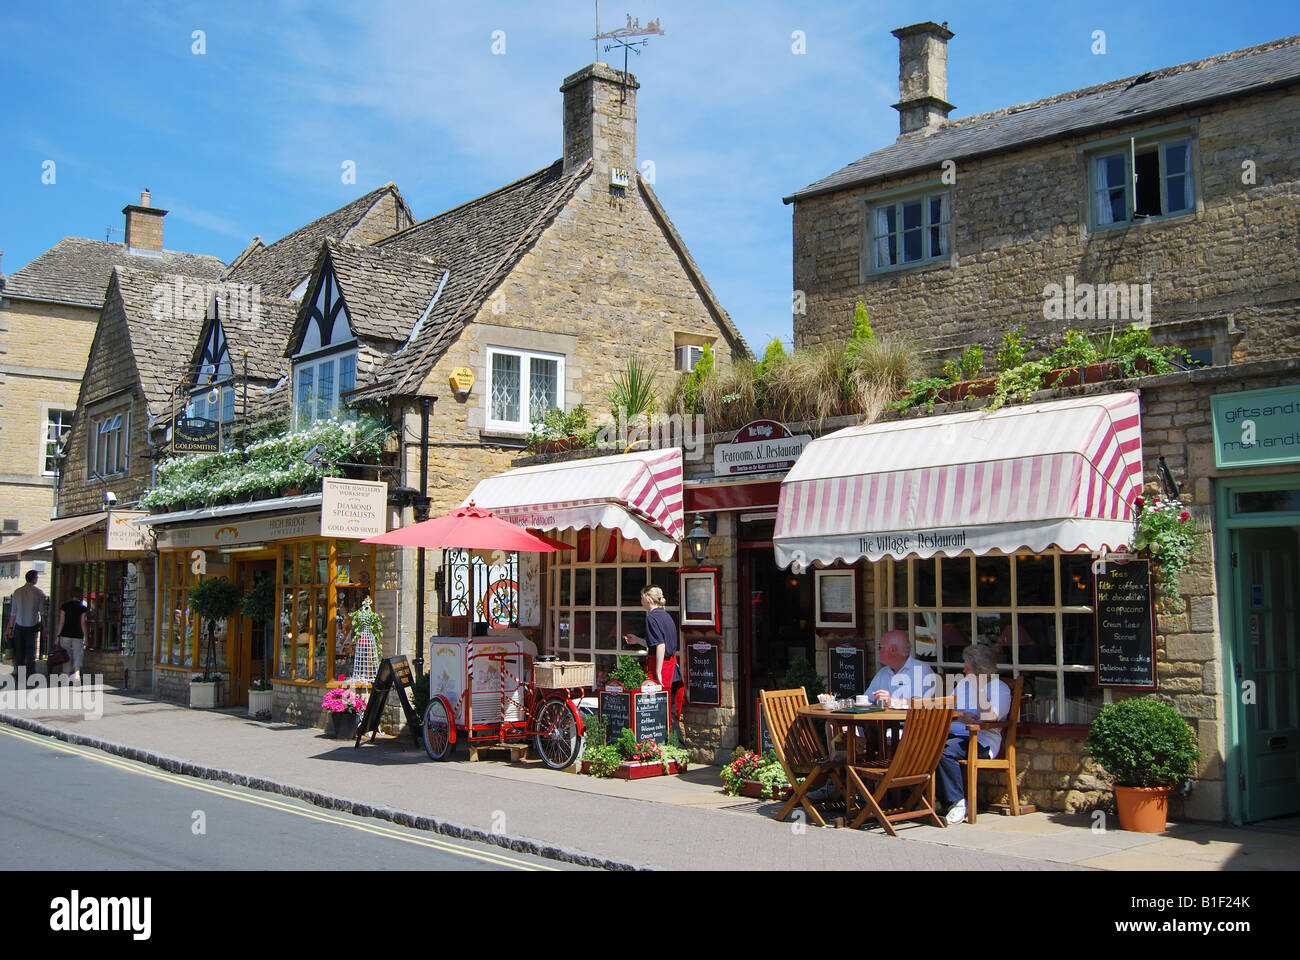 High Street, Bourton-on-the-water, Cotswolds, Gloucestershire, Angleterre, Royaume-Uni Banque D'Images